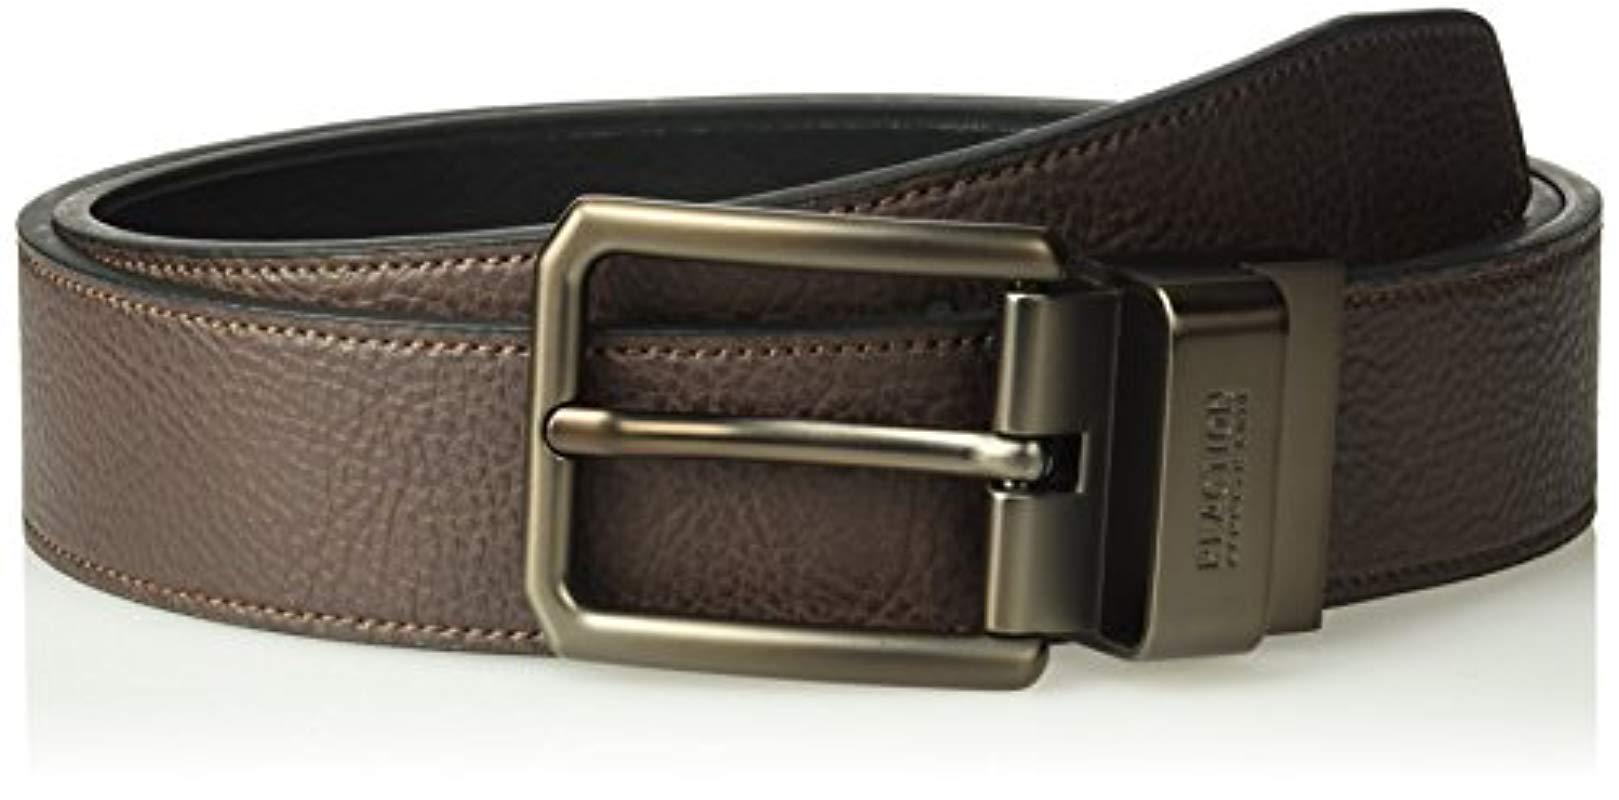 Kenneth Cole Reaction Reversible Casual Belt in Black for Men - Lyst